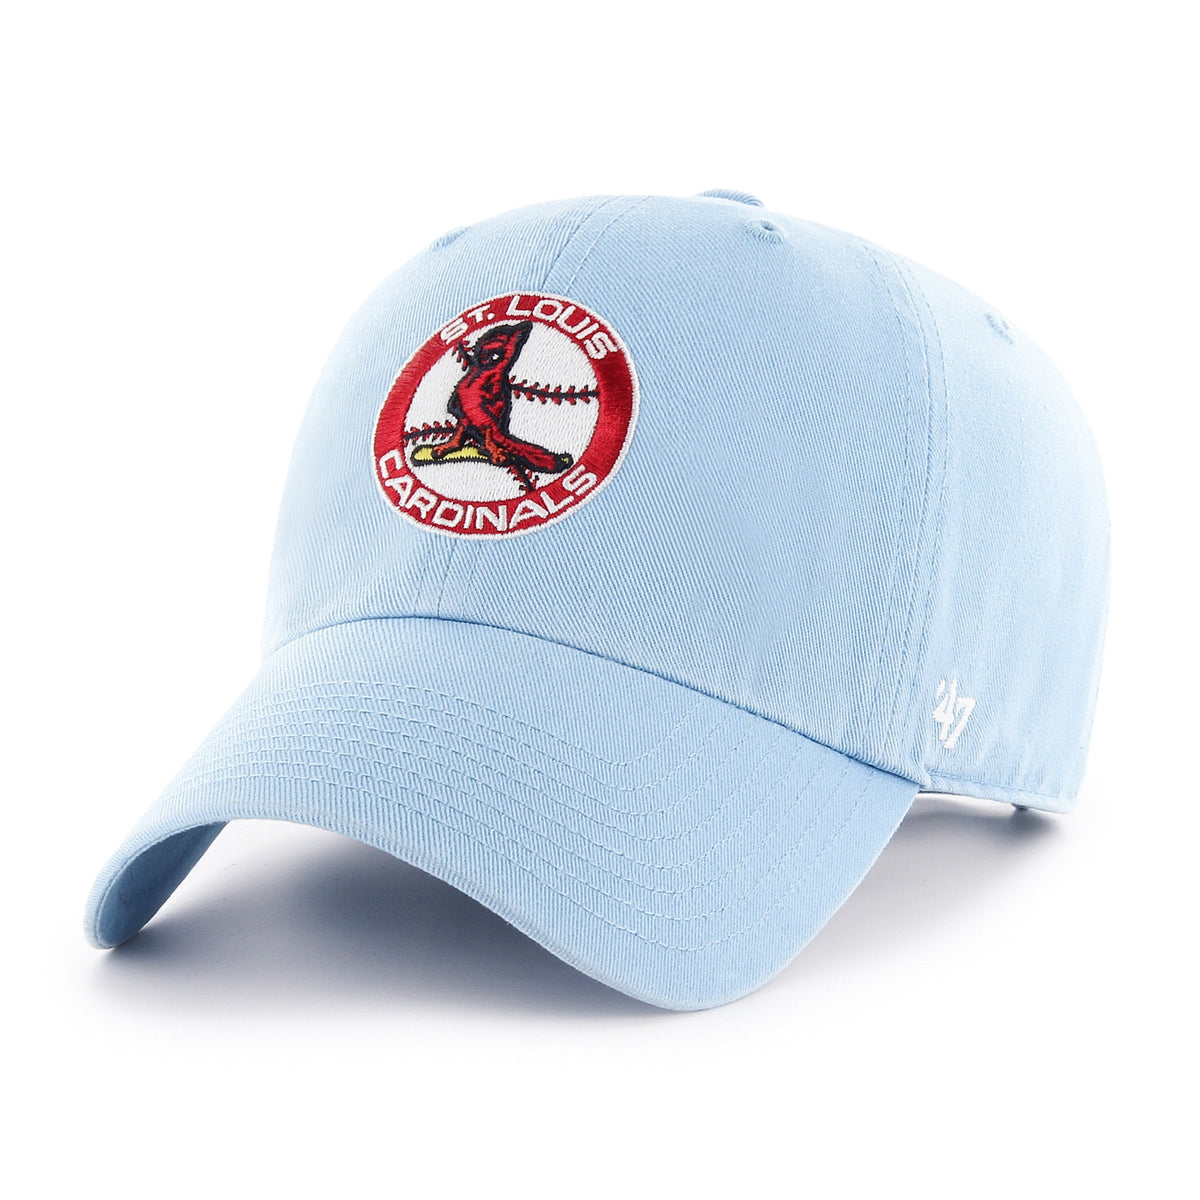 ST. LOUIS CARDINALS COOPERSTOWN '47 CLEAN UP